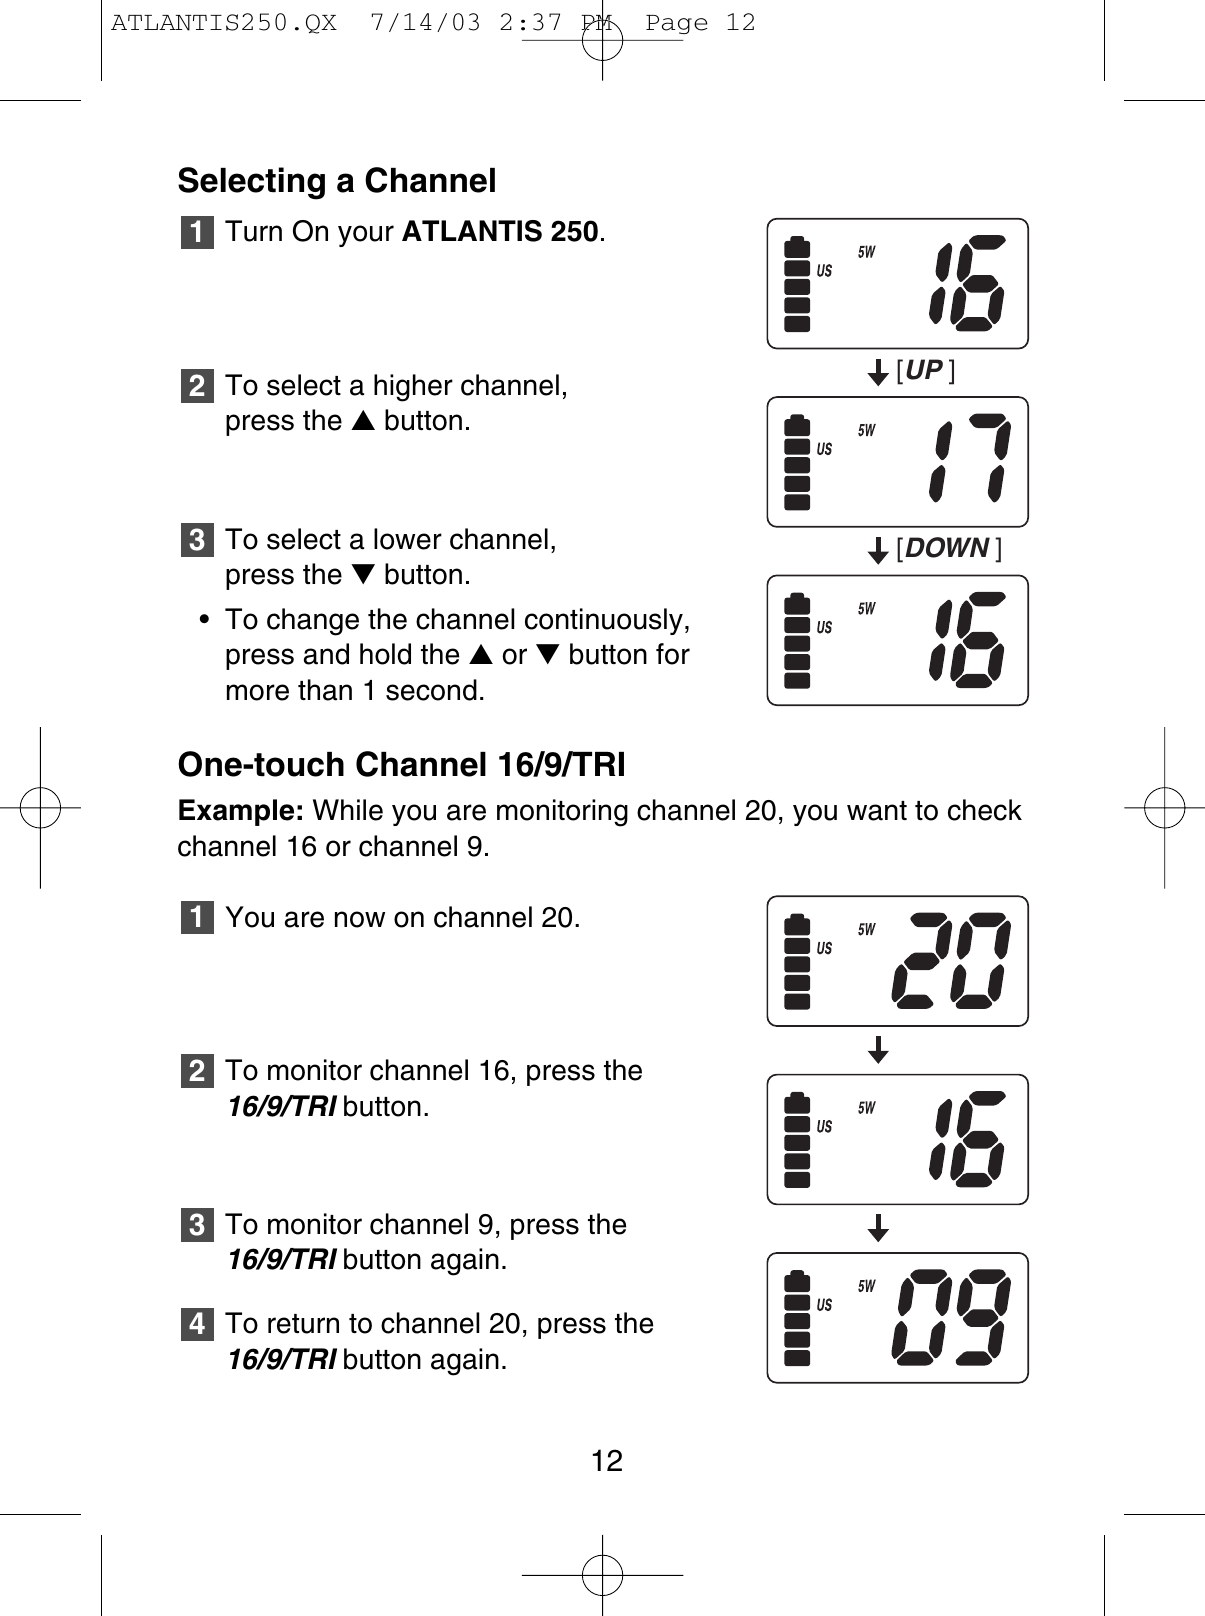 Selecting a ChannelTurn On your ATLANTIS 250.To select a higher channel, press the ▲button.To select a lower channel, press the ▼button.• To change the channel continuously,press and hold the ▲or ▼button formore than 1 second.One-touch Channel 16/9/TRIExample: While you are monitoring channel 20, you want to checkchannel 16 or channel 9.You are now on channel 20.To monitor channel 16, press the16/9/TRI button.To monitor channel 9, press the 16/9/TRI button again.To return to channel 20, press the16/9/TRI button again.432132112[UP][DOWN ]ATLANTIS250.QX  7/14/03 2:37 PM  Page 12